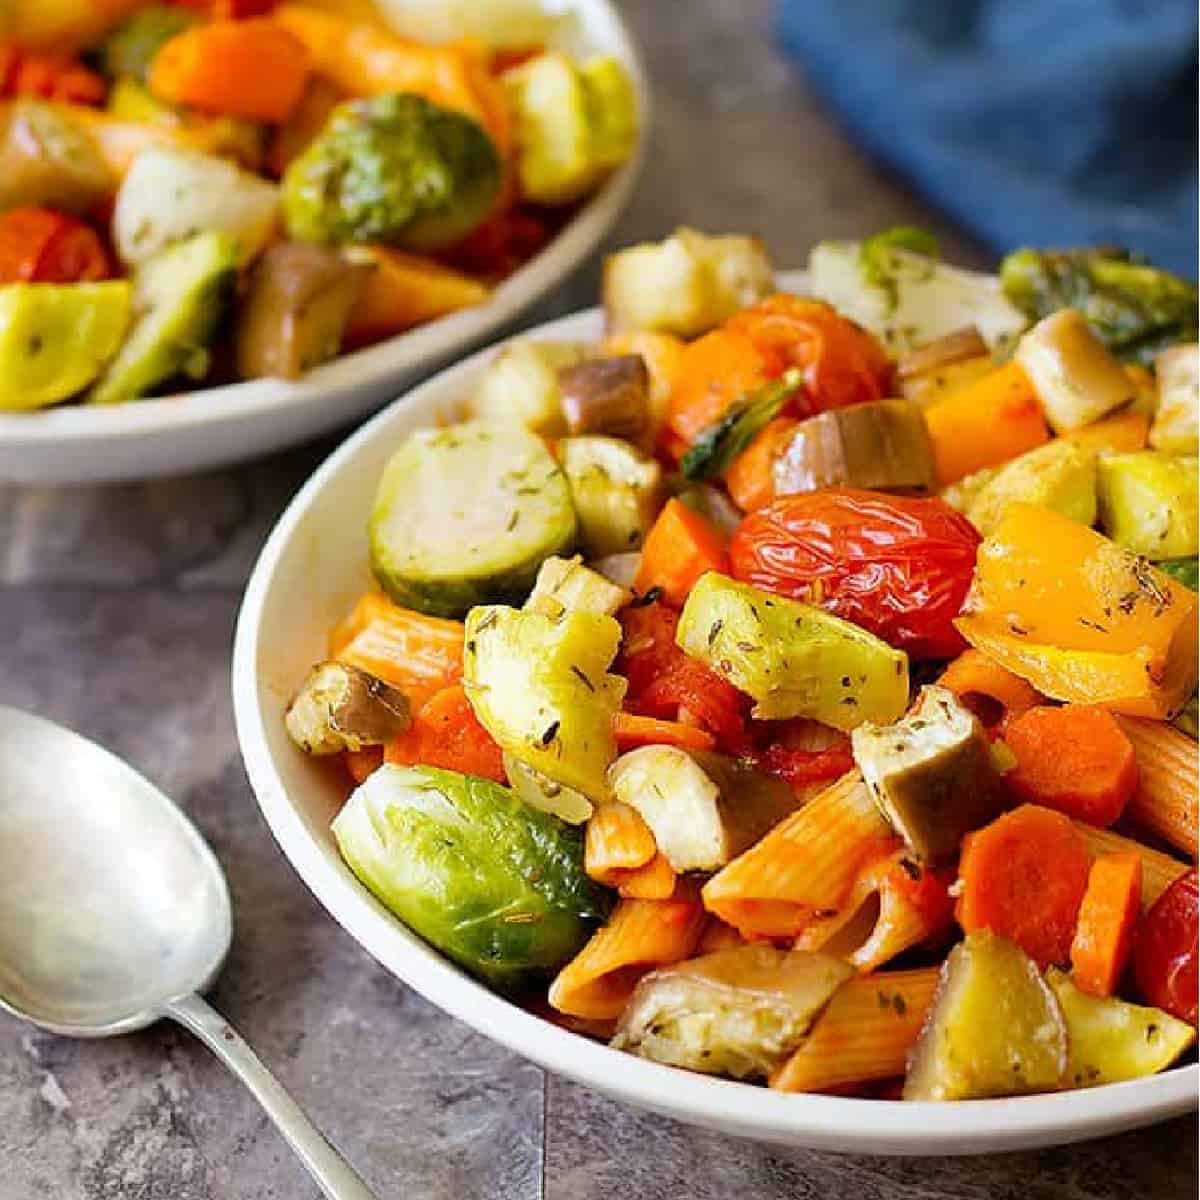 easy healthy dinner ideas - Roasted vegetable pasta is a delicious weeknight meal that's bursting with amazing flavors. This vegetarian pasta recipe is easy, quick and perfect for a family meal. 